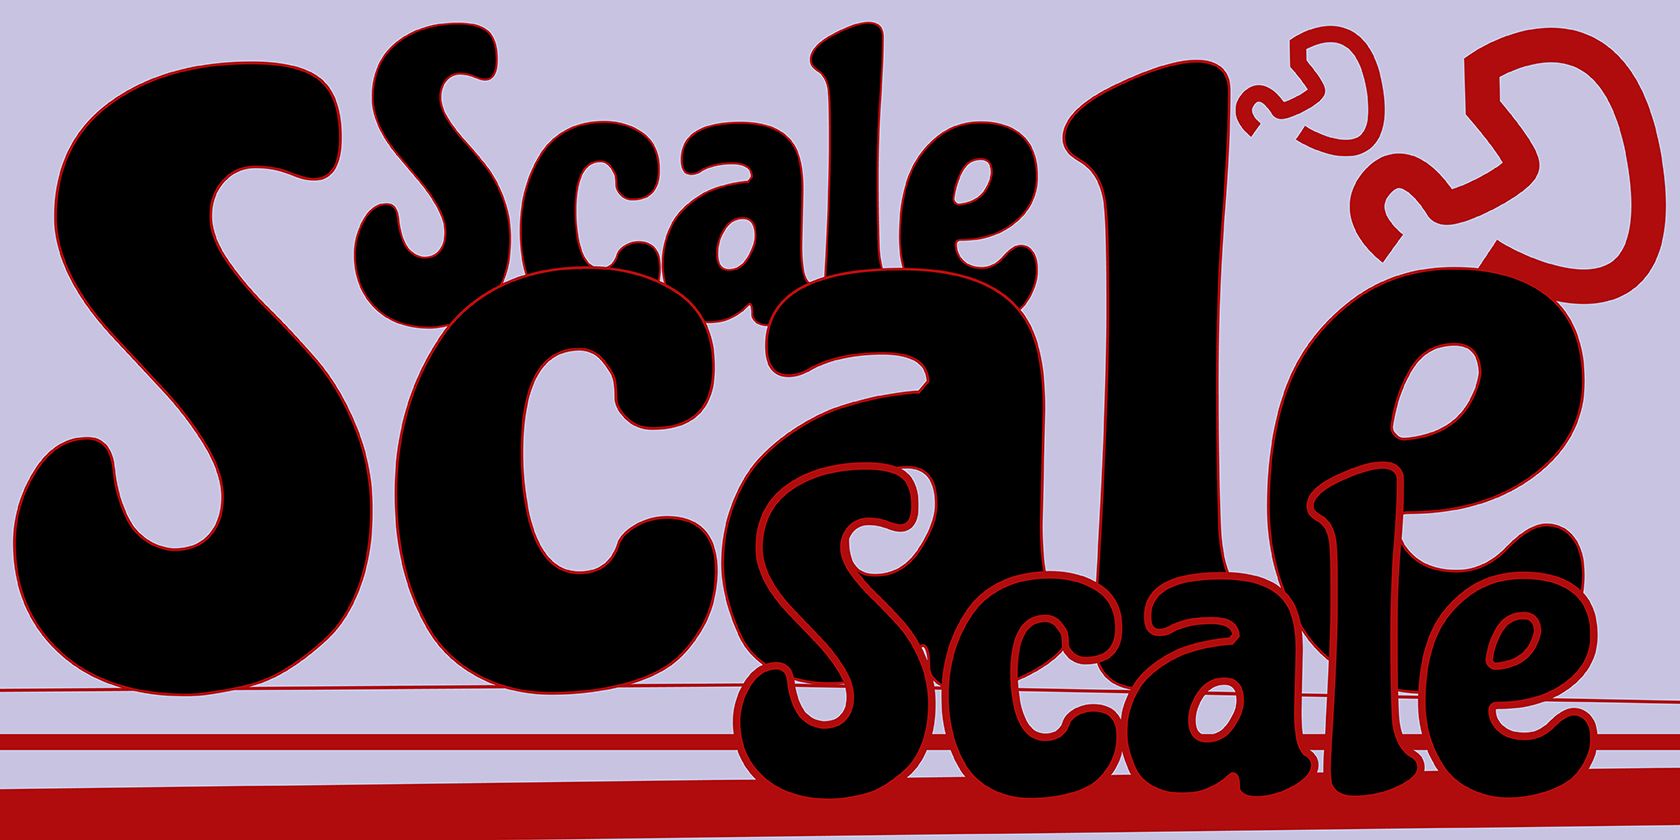 Scale word with scaled stroke paths.